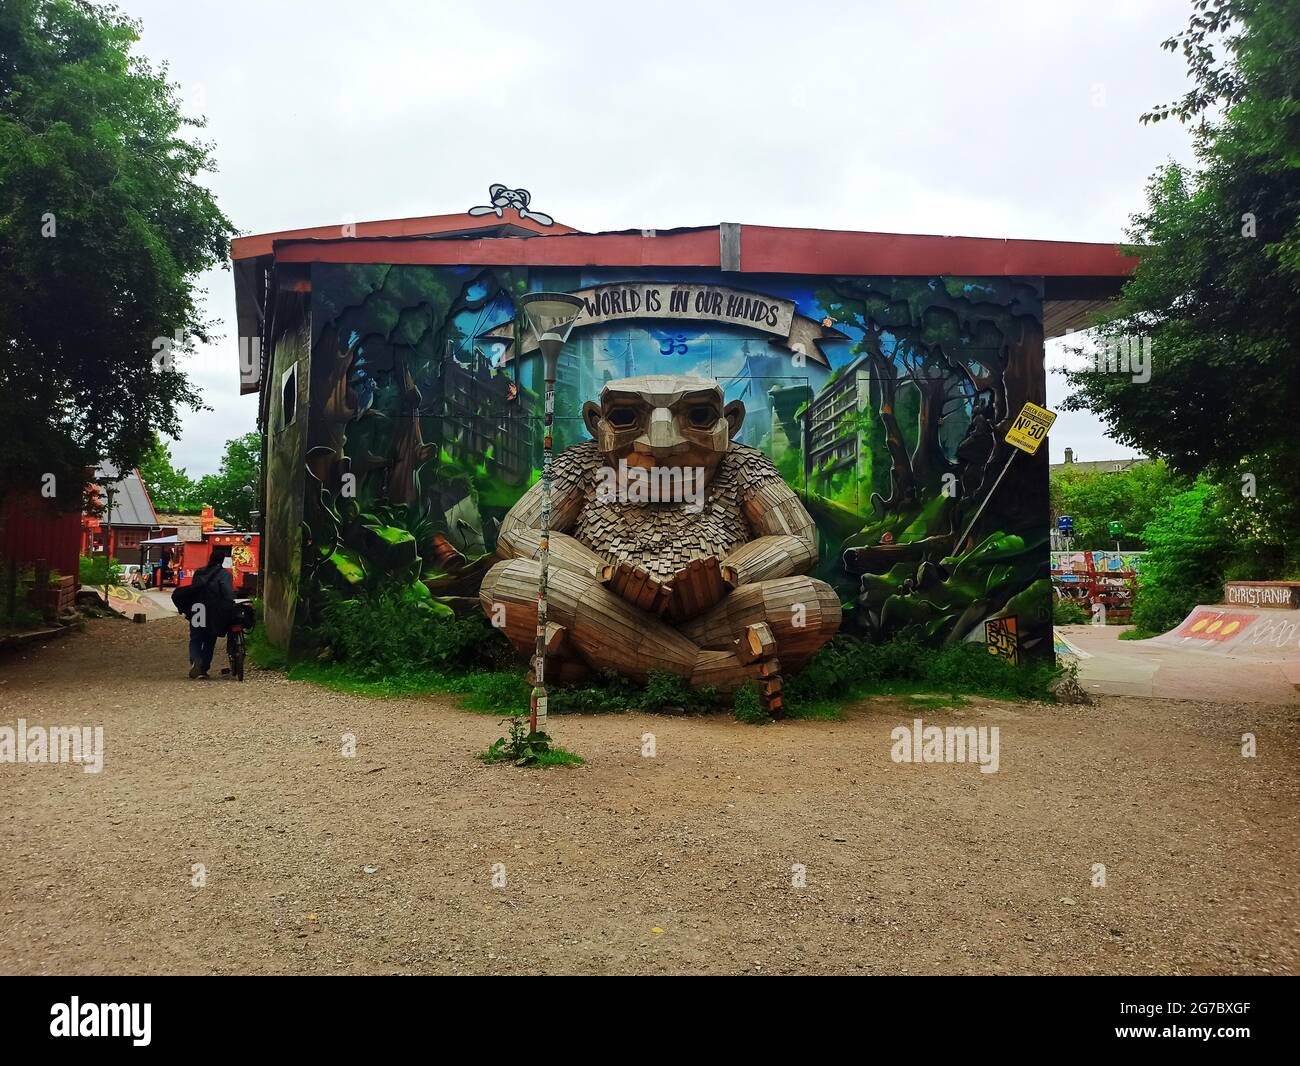 Copenhagen, Denmark - July 2021: GREEN GEORGE, also known as 'The World Is In Our Hands' trashed wooden art installation in Freetown Christiania Stock Photo